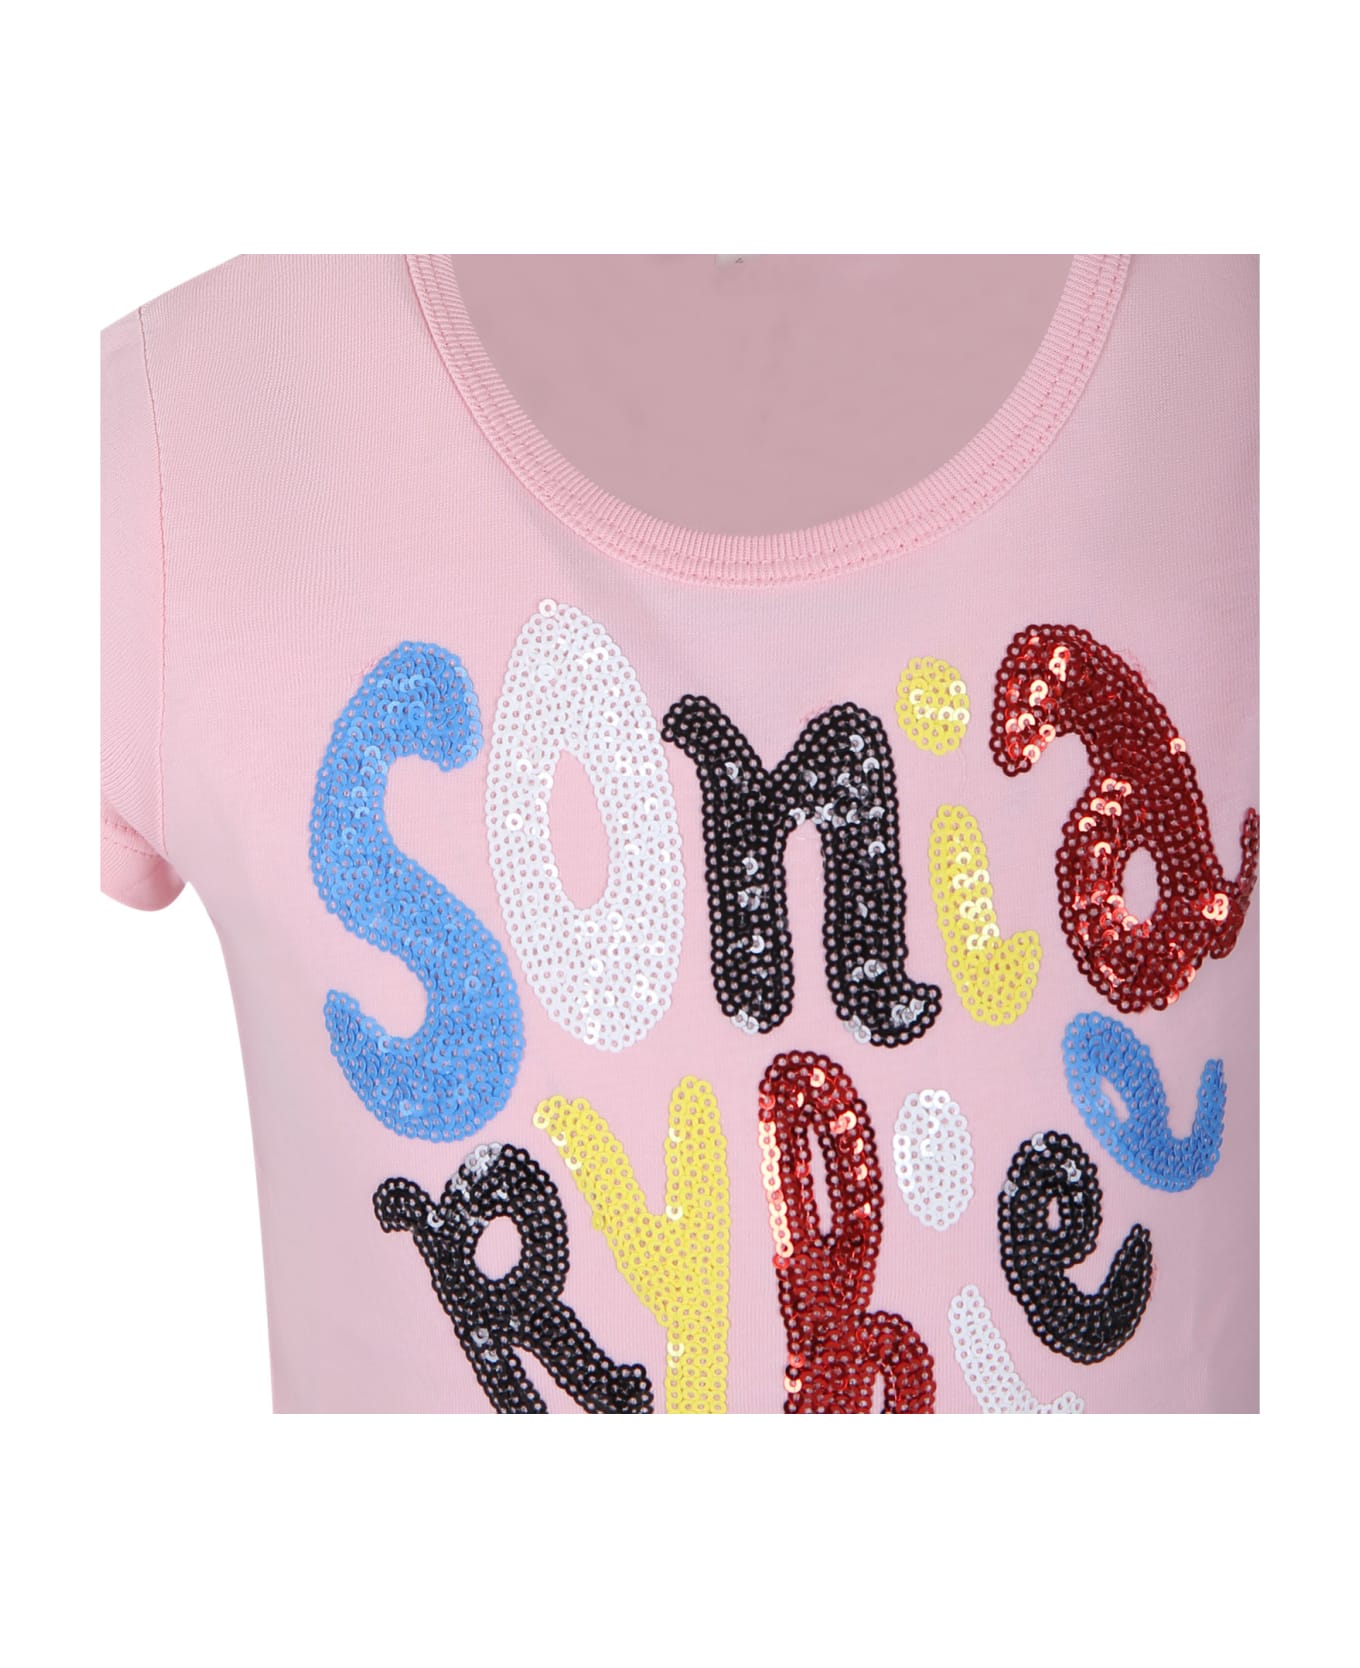 Rykiel Enfant Pink T-shirt For Girl With Logo And Sequins - Pink Tシャツ＆ポロシャツ